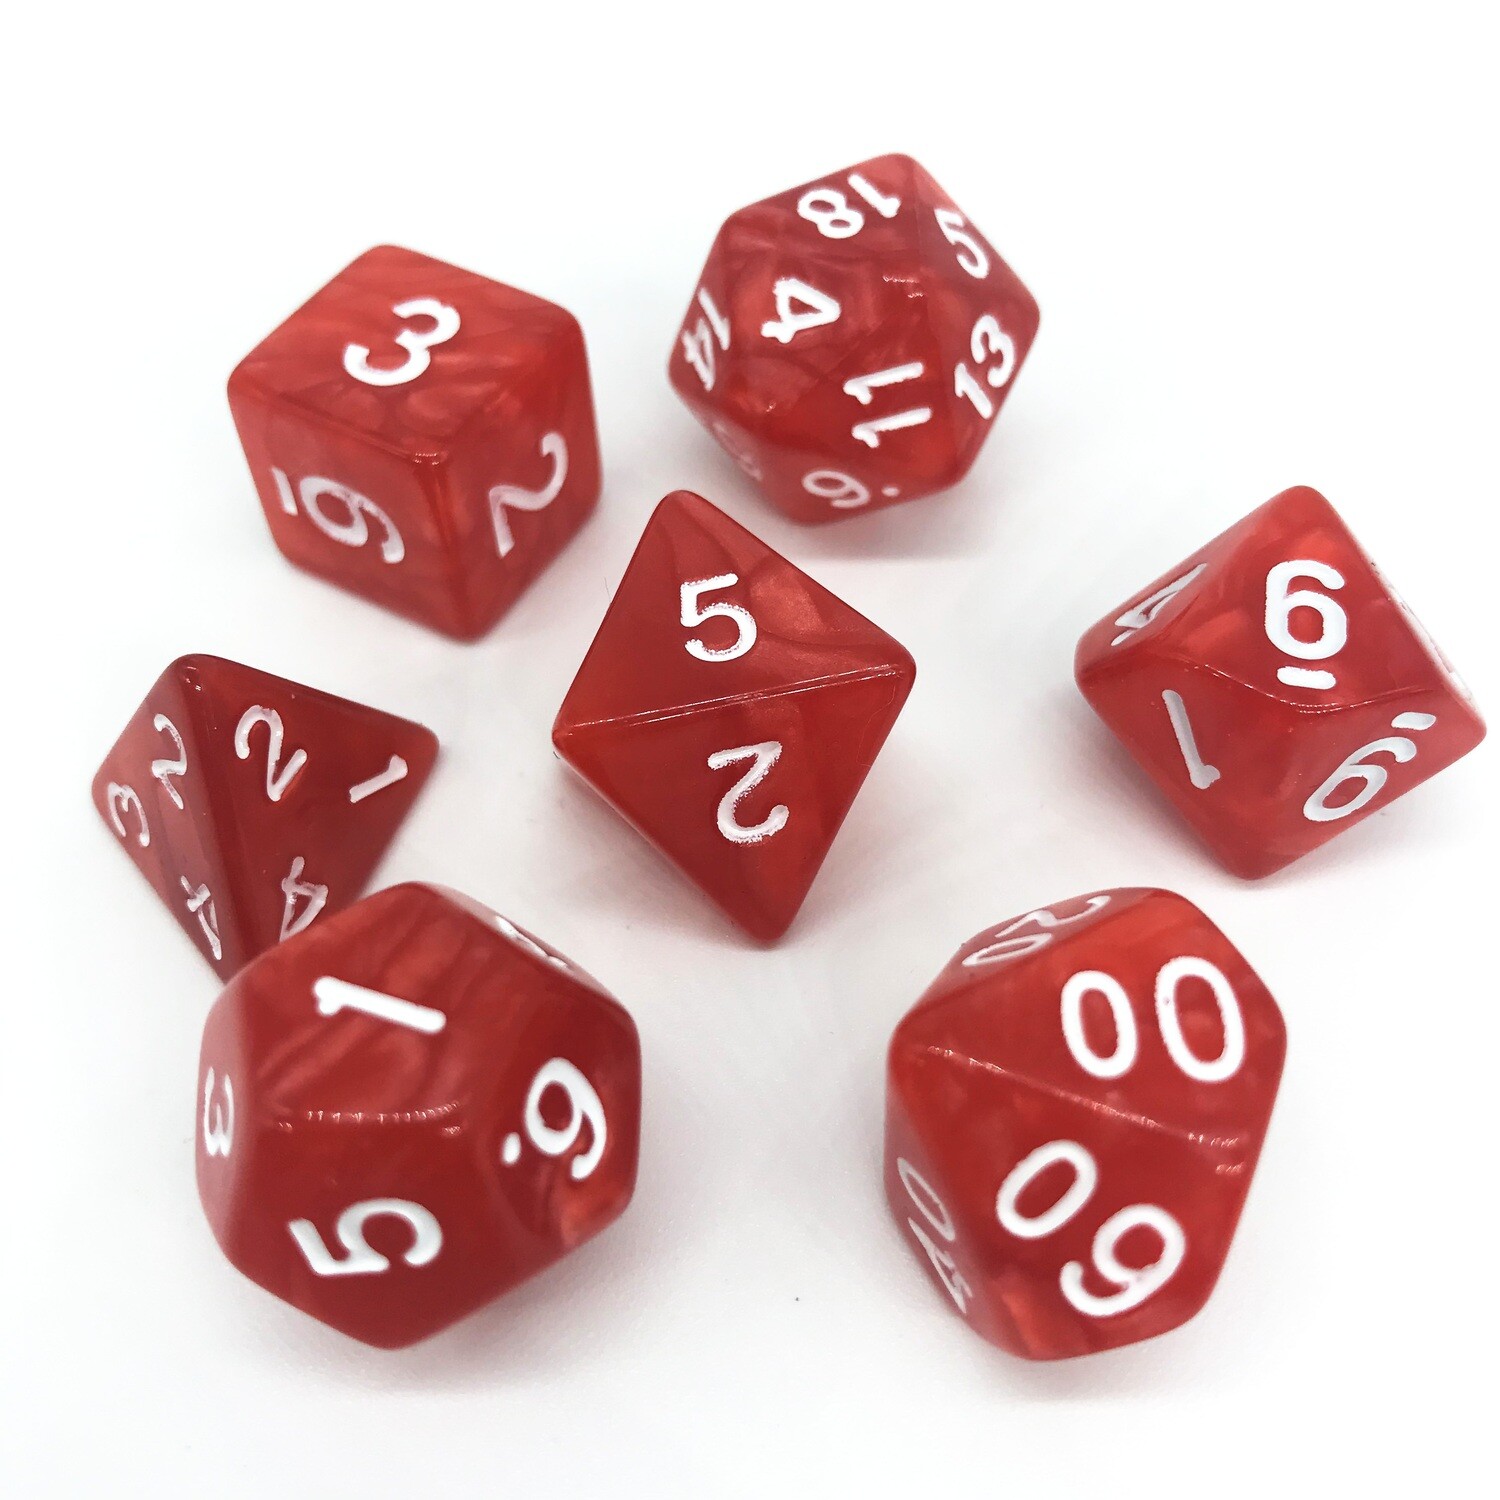 Dice Set - Red marbled with white numbers